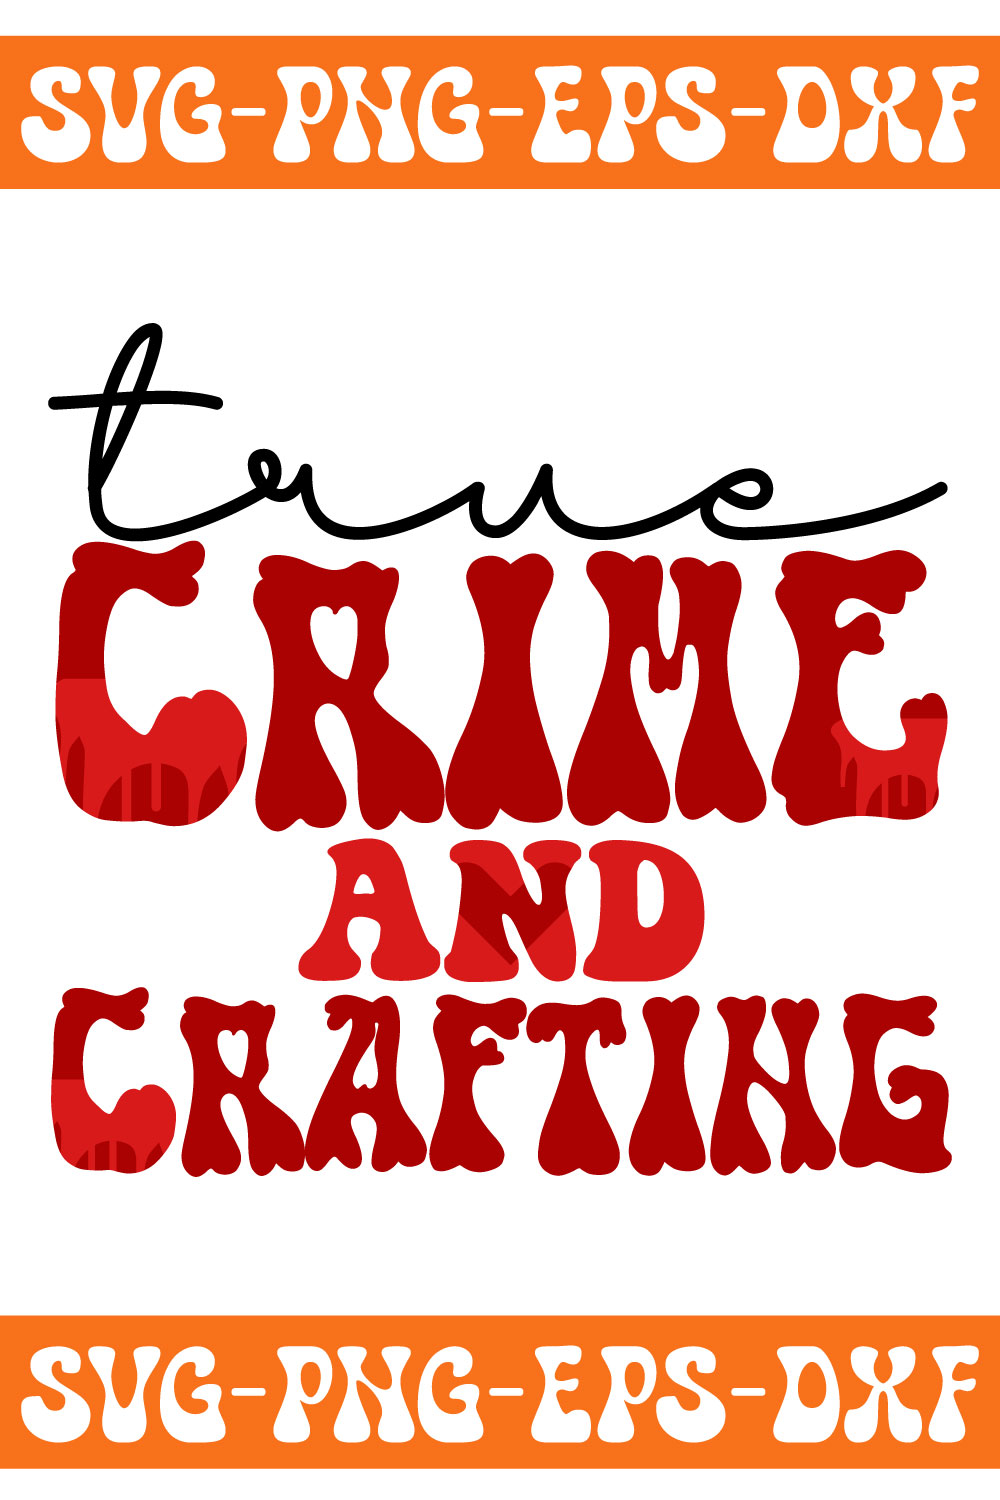 Orange and white sign with the words crave and crafting.